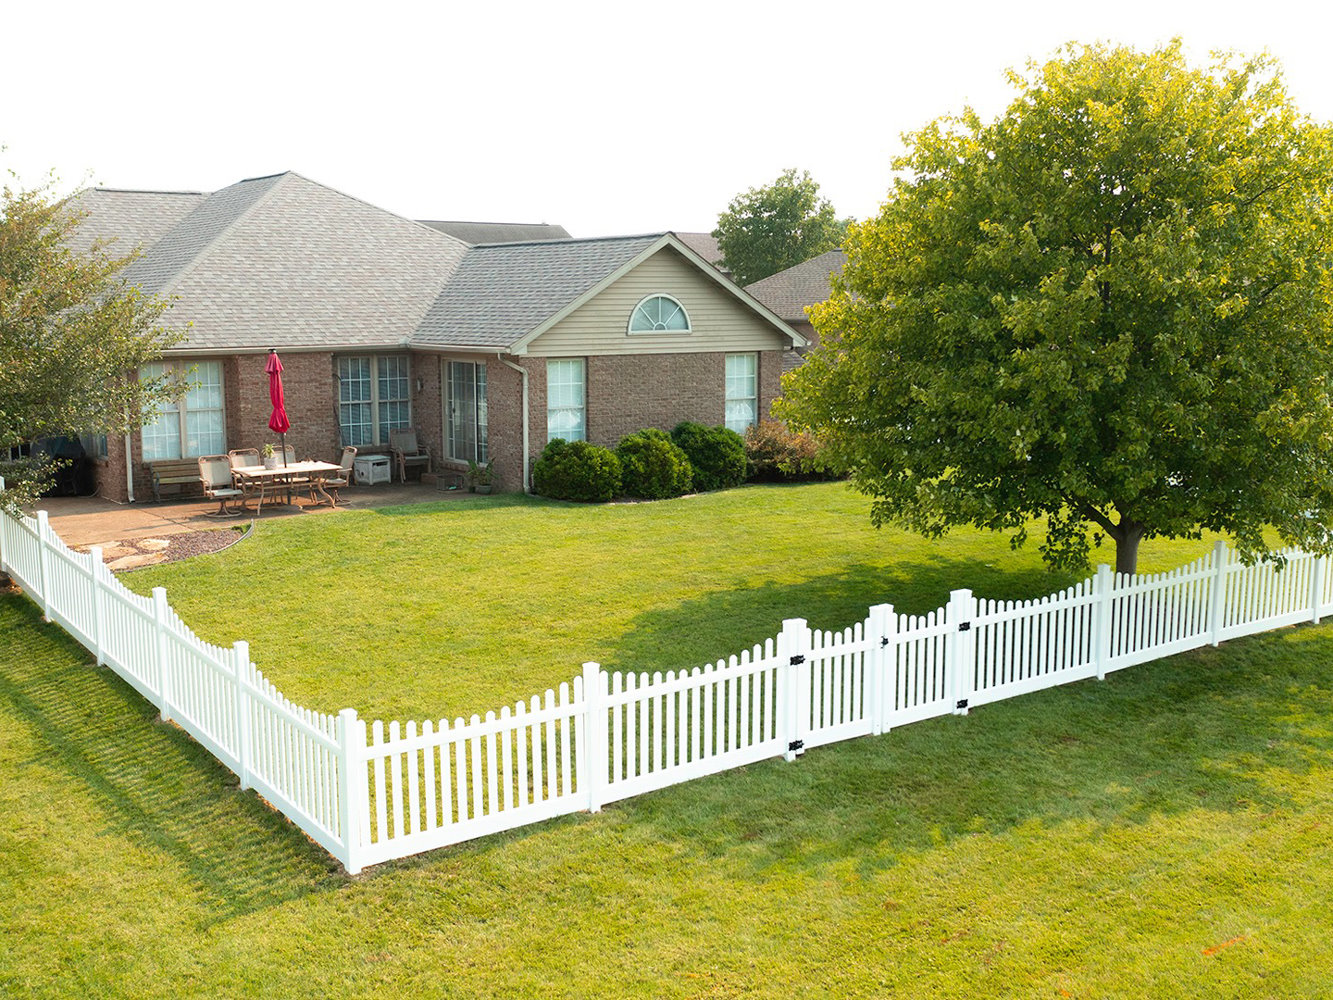 McCutchanville Indiana residential and commercial fencing